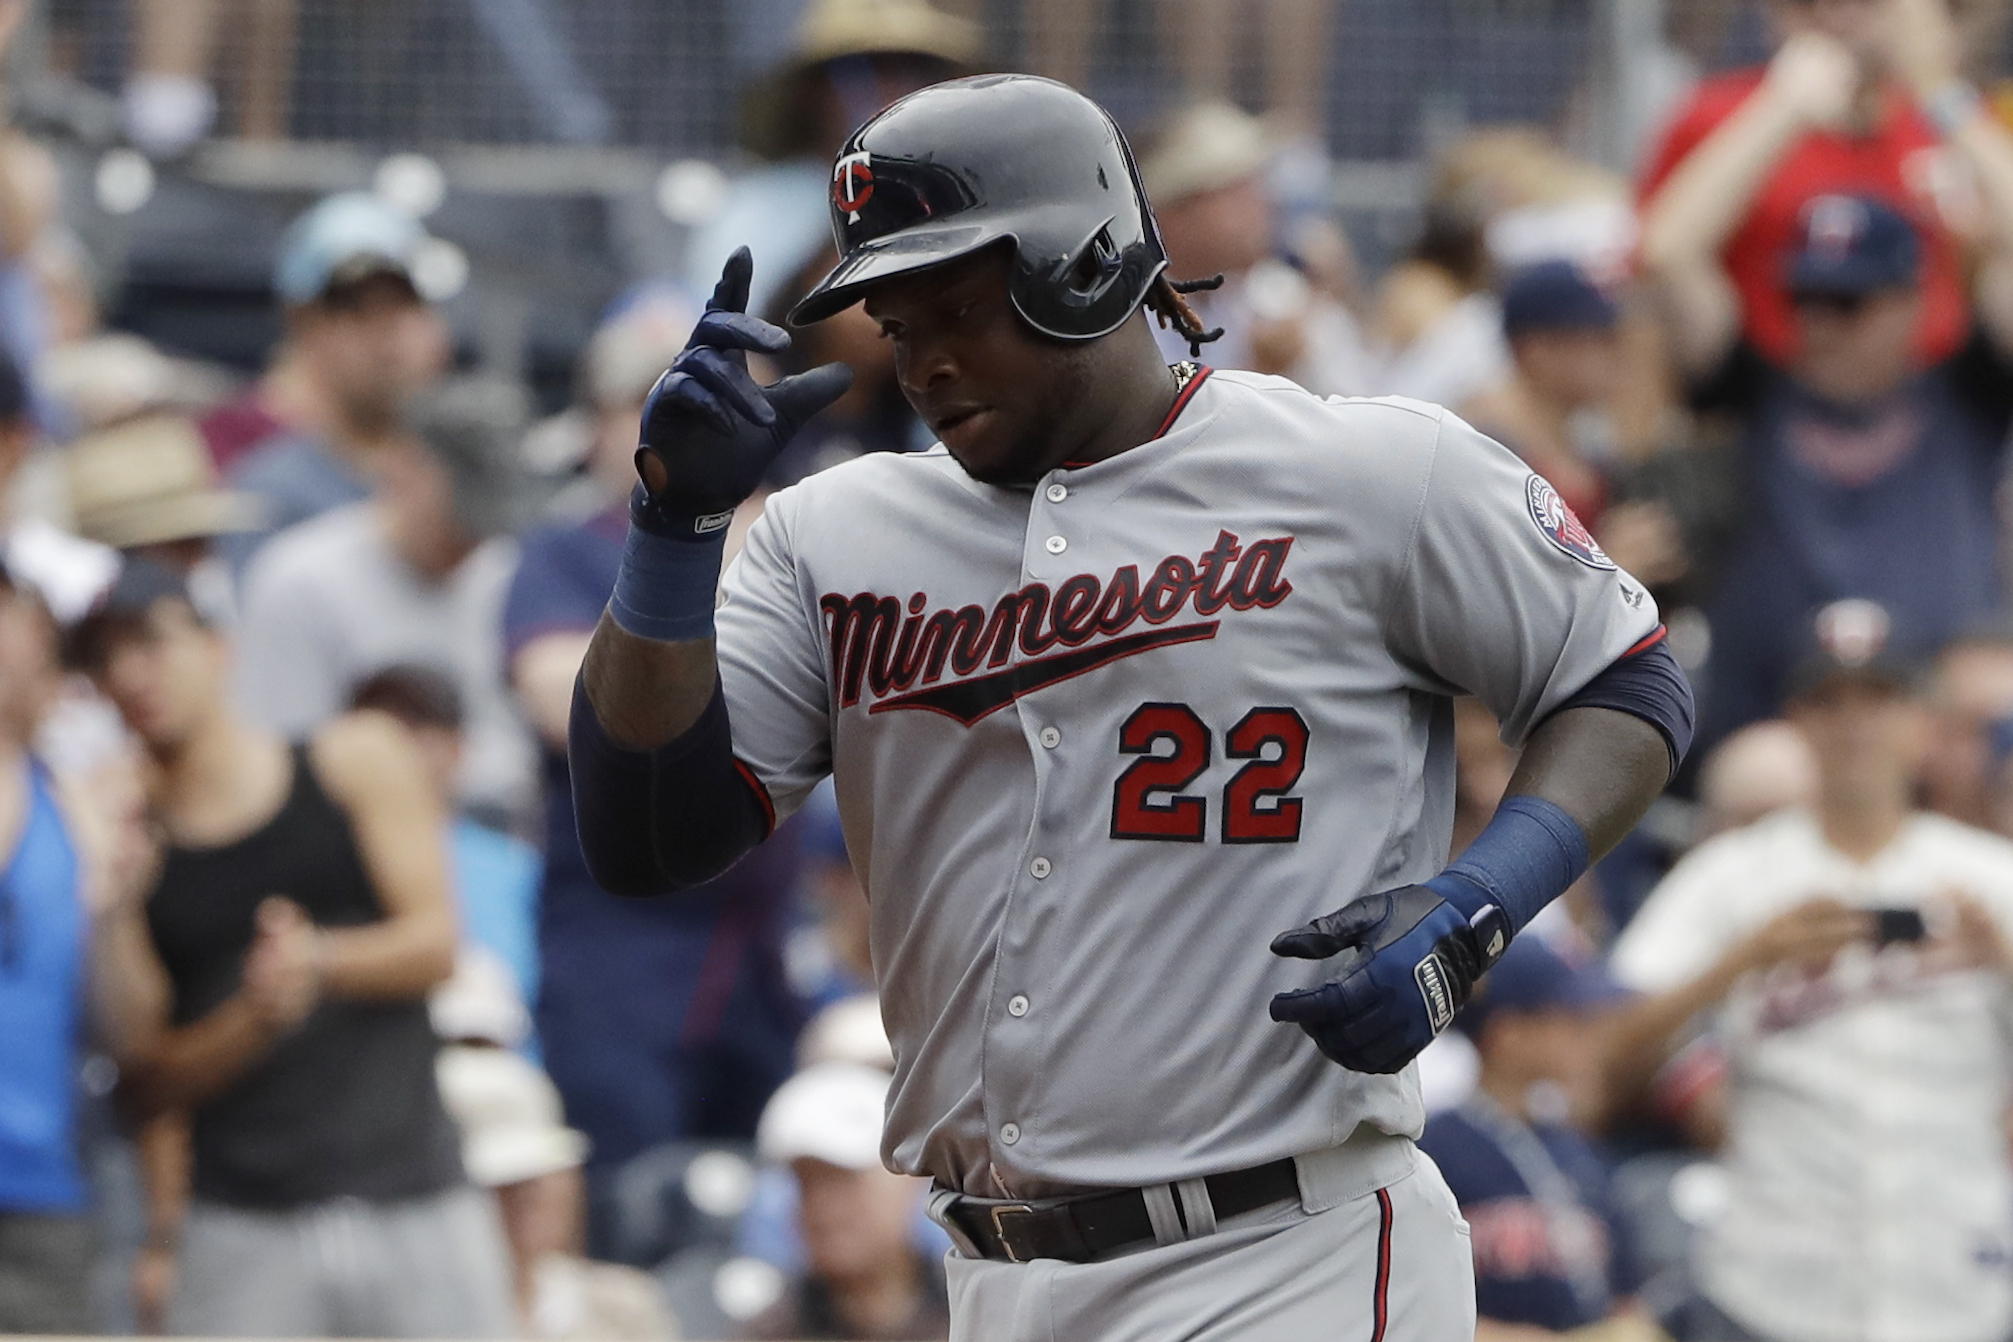 WATCH, ENJOY: All 18 of Miguel Sano's home runs in 2015 